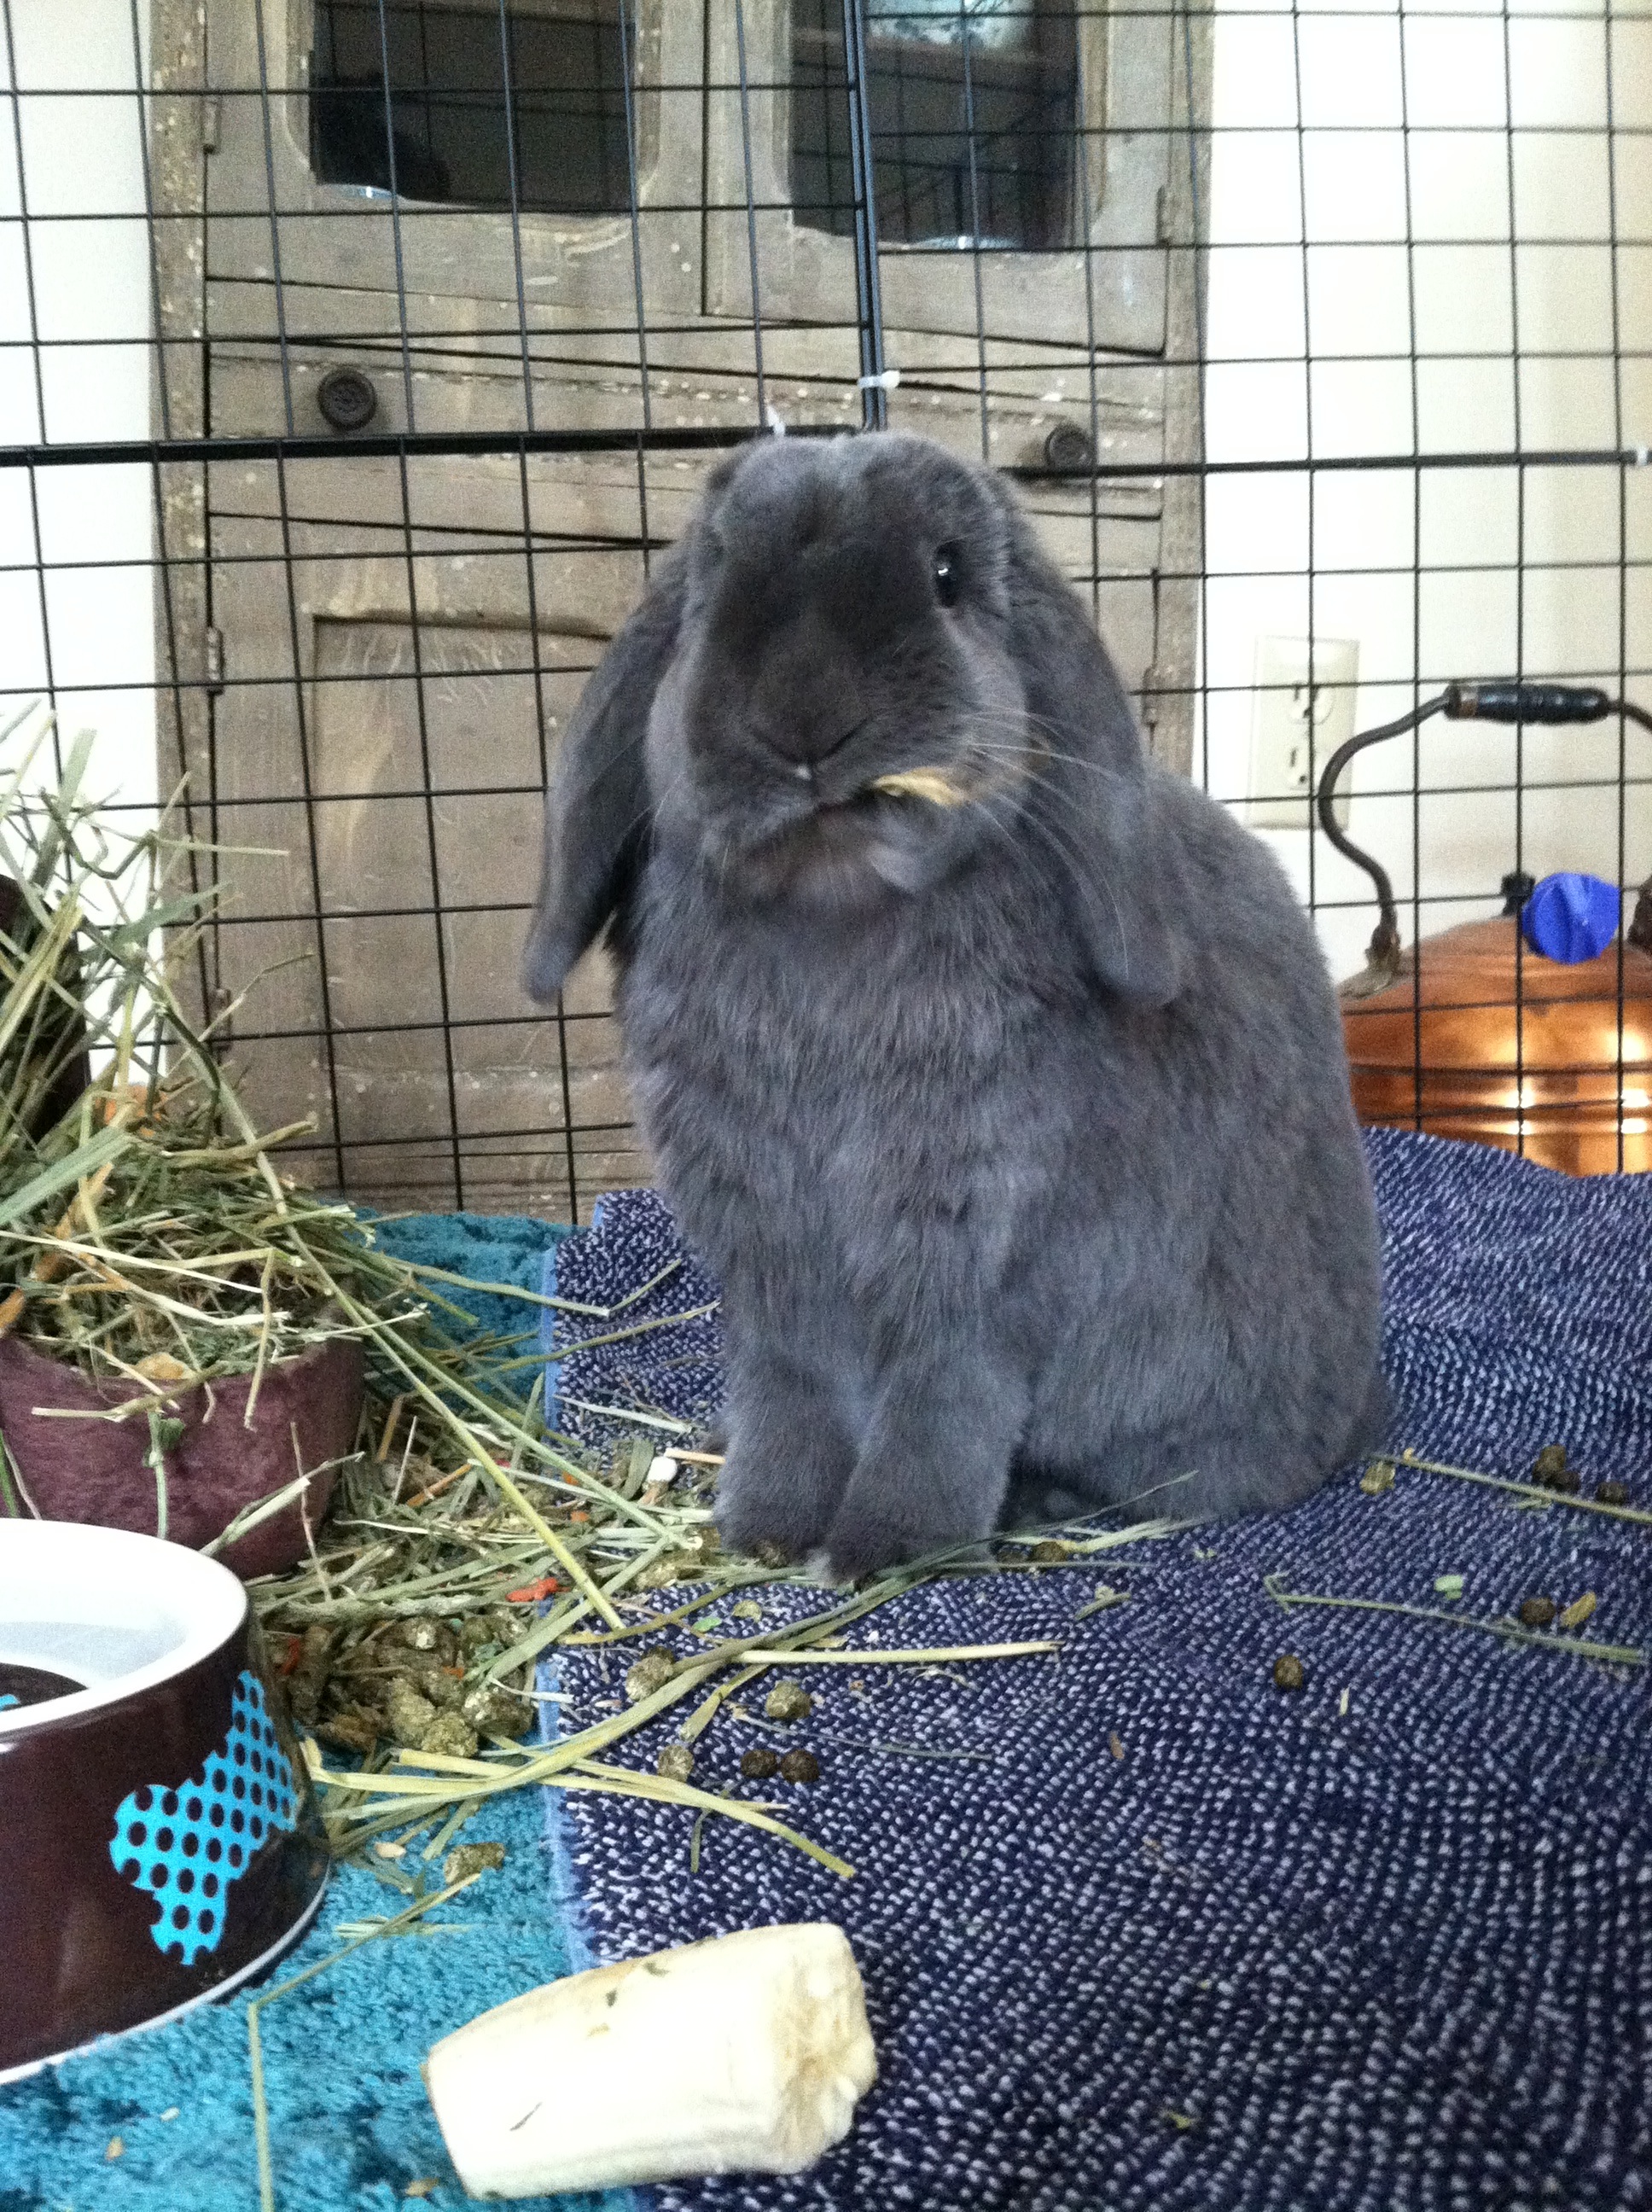 Bunny Sticks Hay in His Mouth for His Cowboy Impression